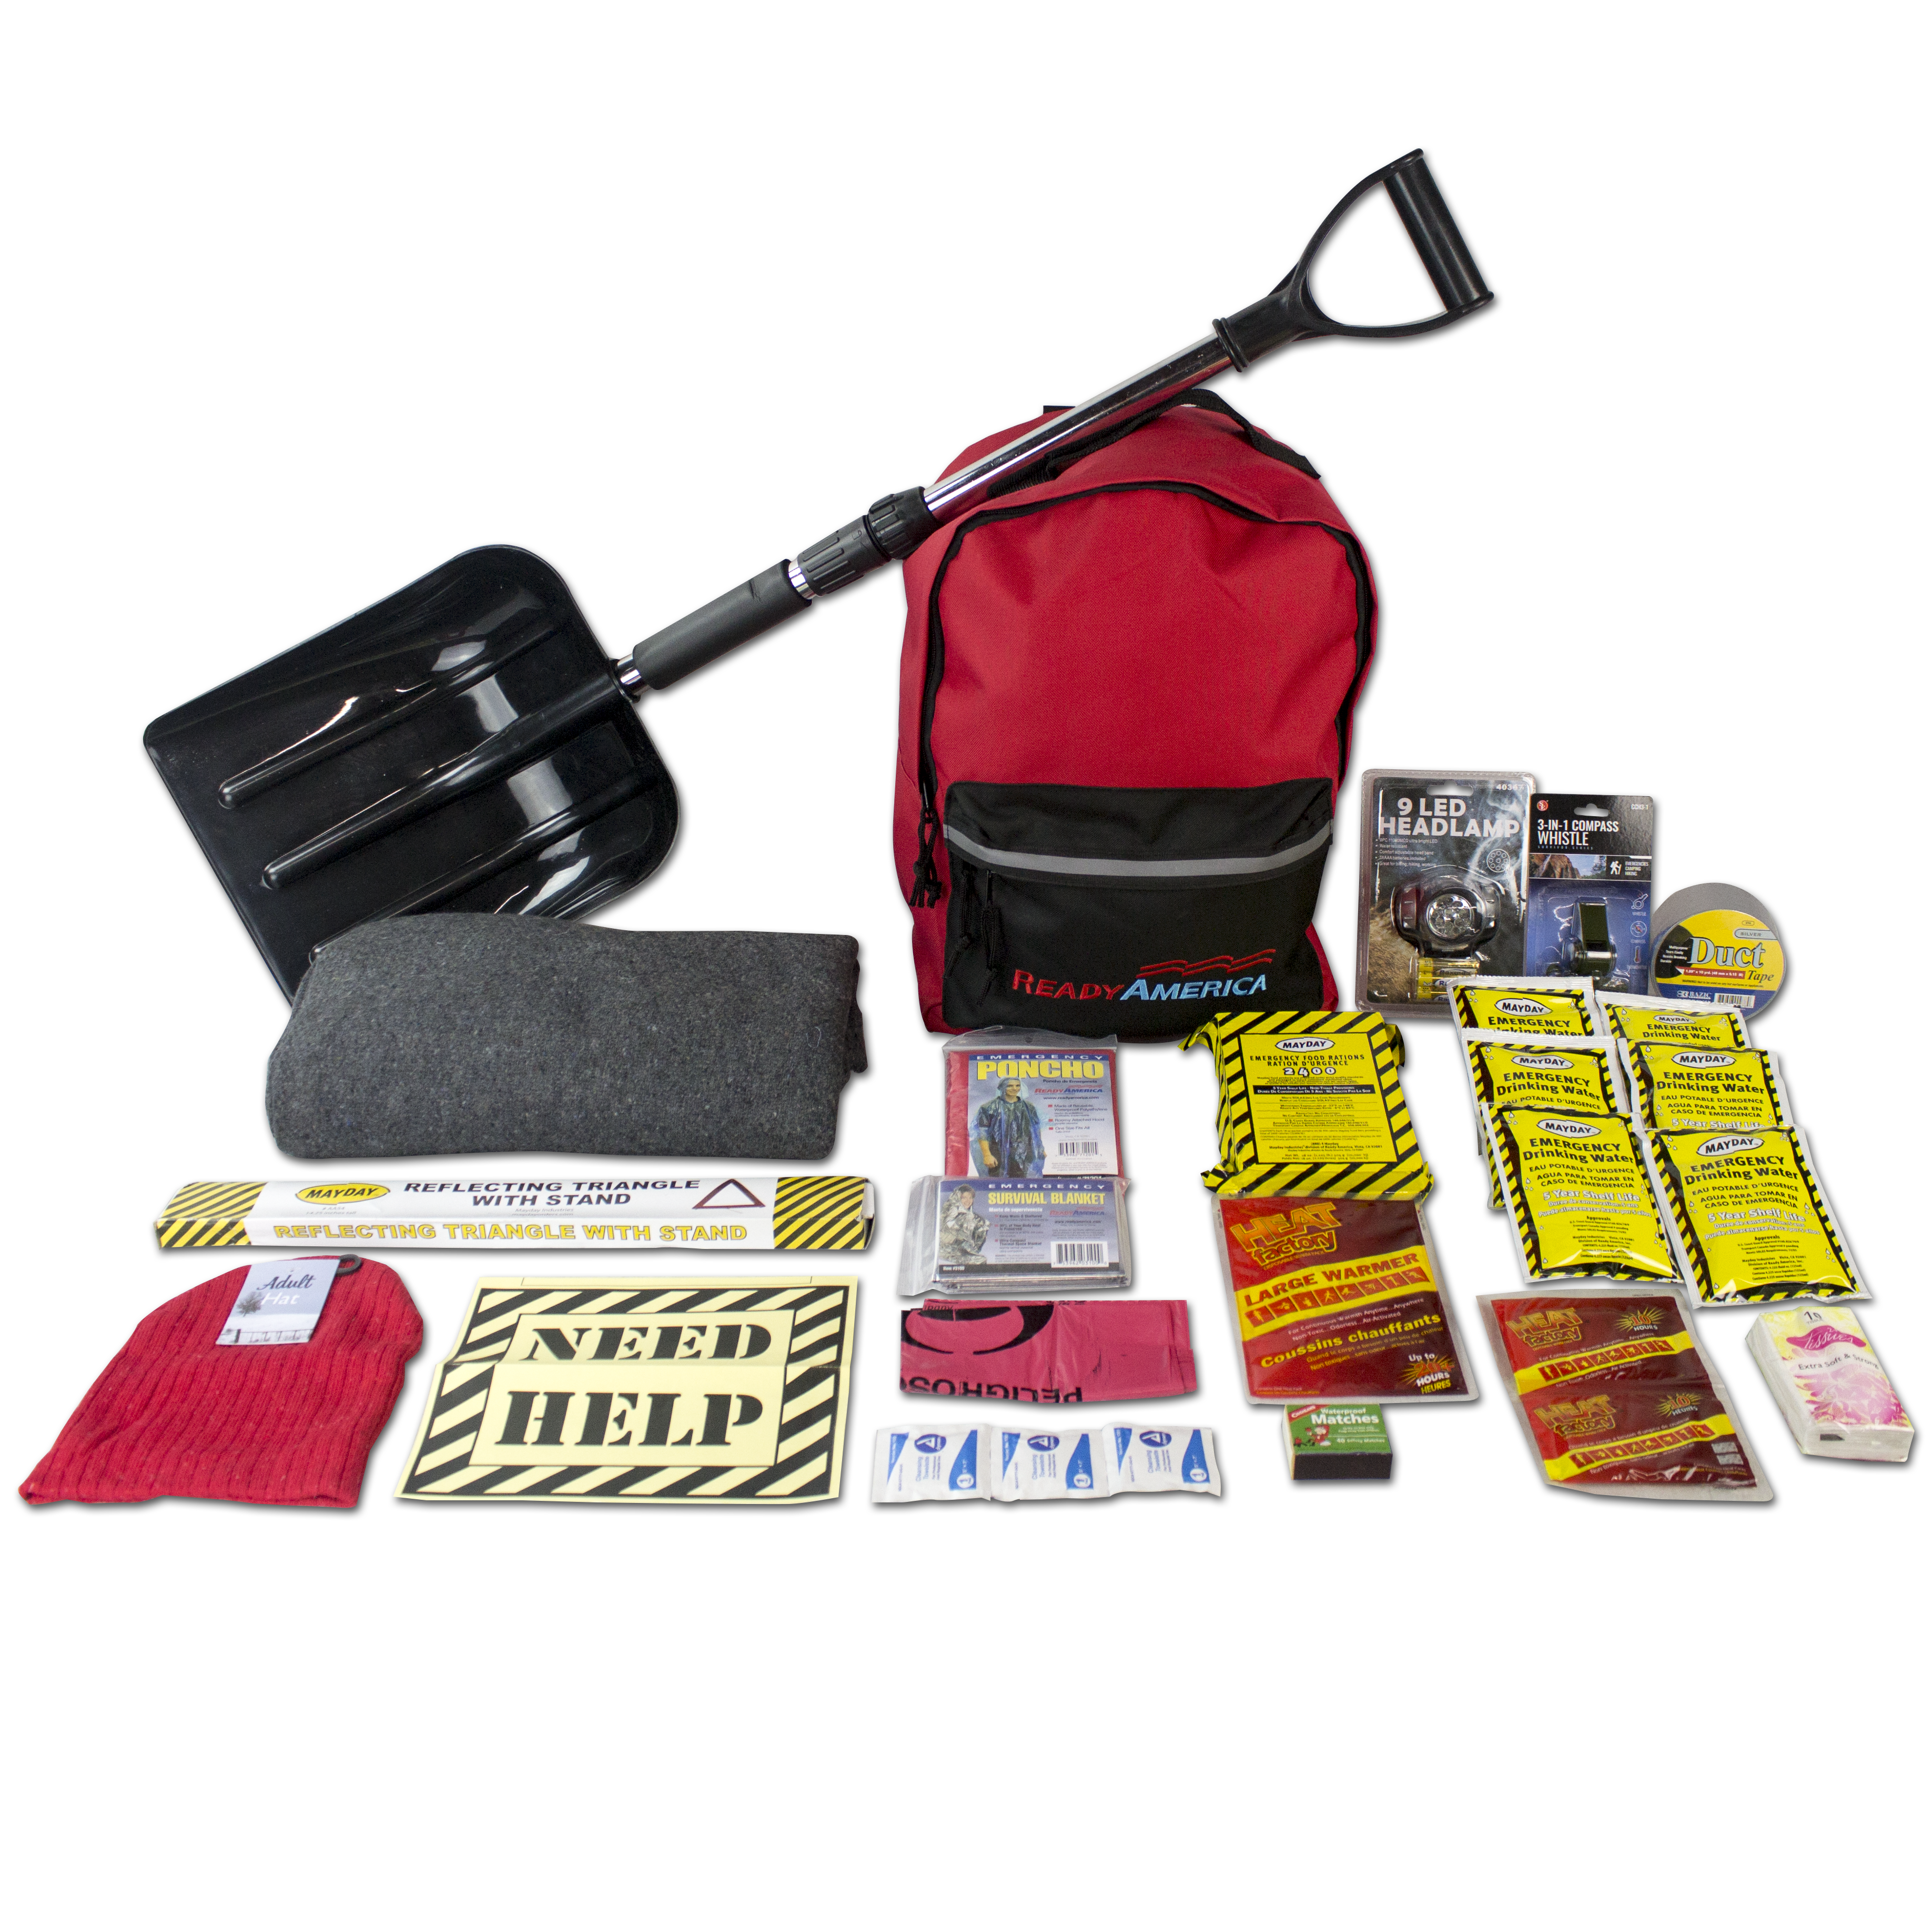 https://www.readyamerica.com/wp-content/uploads/2020/12/70400-1PersonColdWeatherSurvivalKit3dayBackpack-NOBG.png